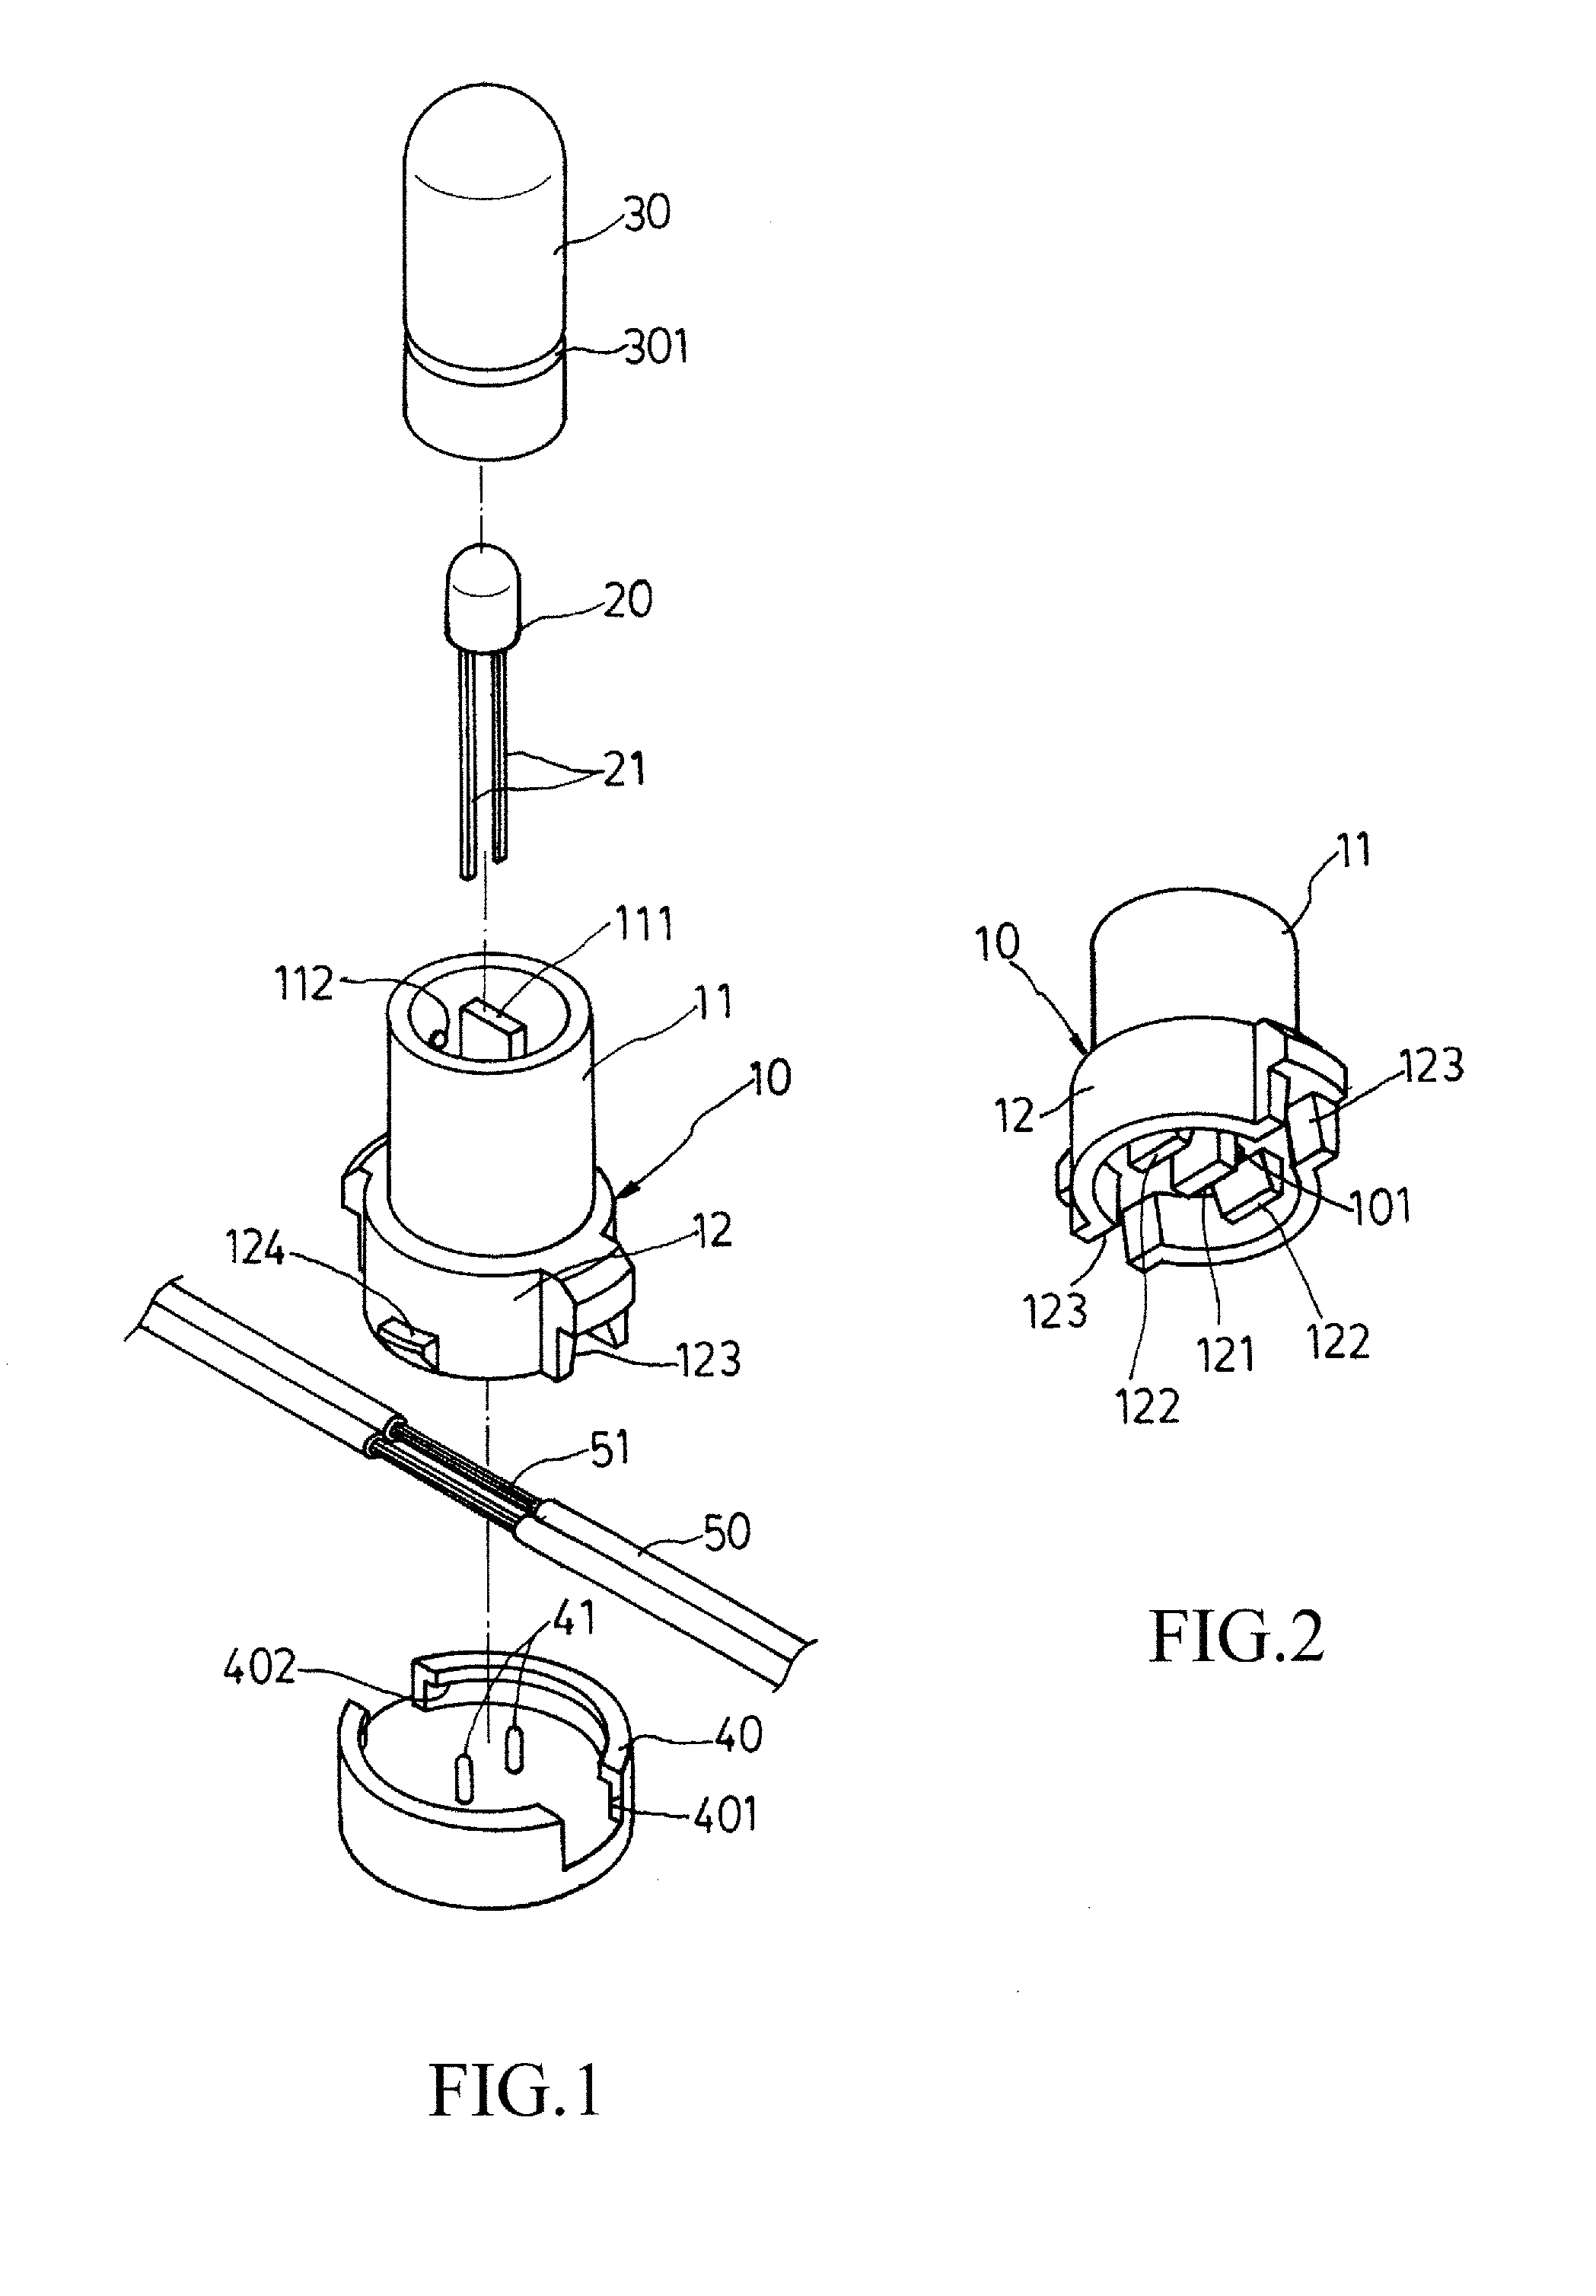 Bulb socket having terminals connected to a partially stripped cord